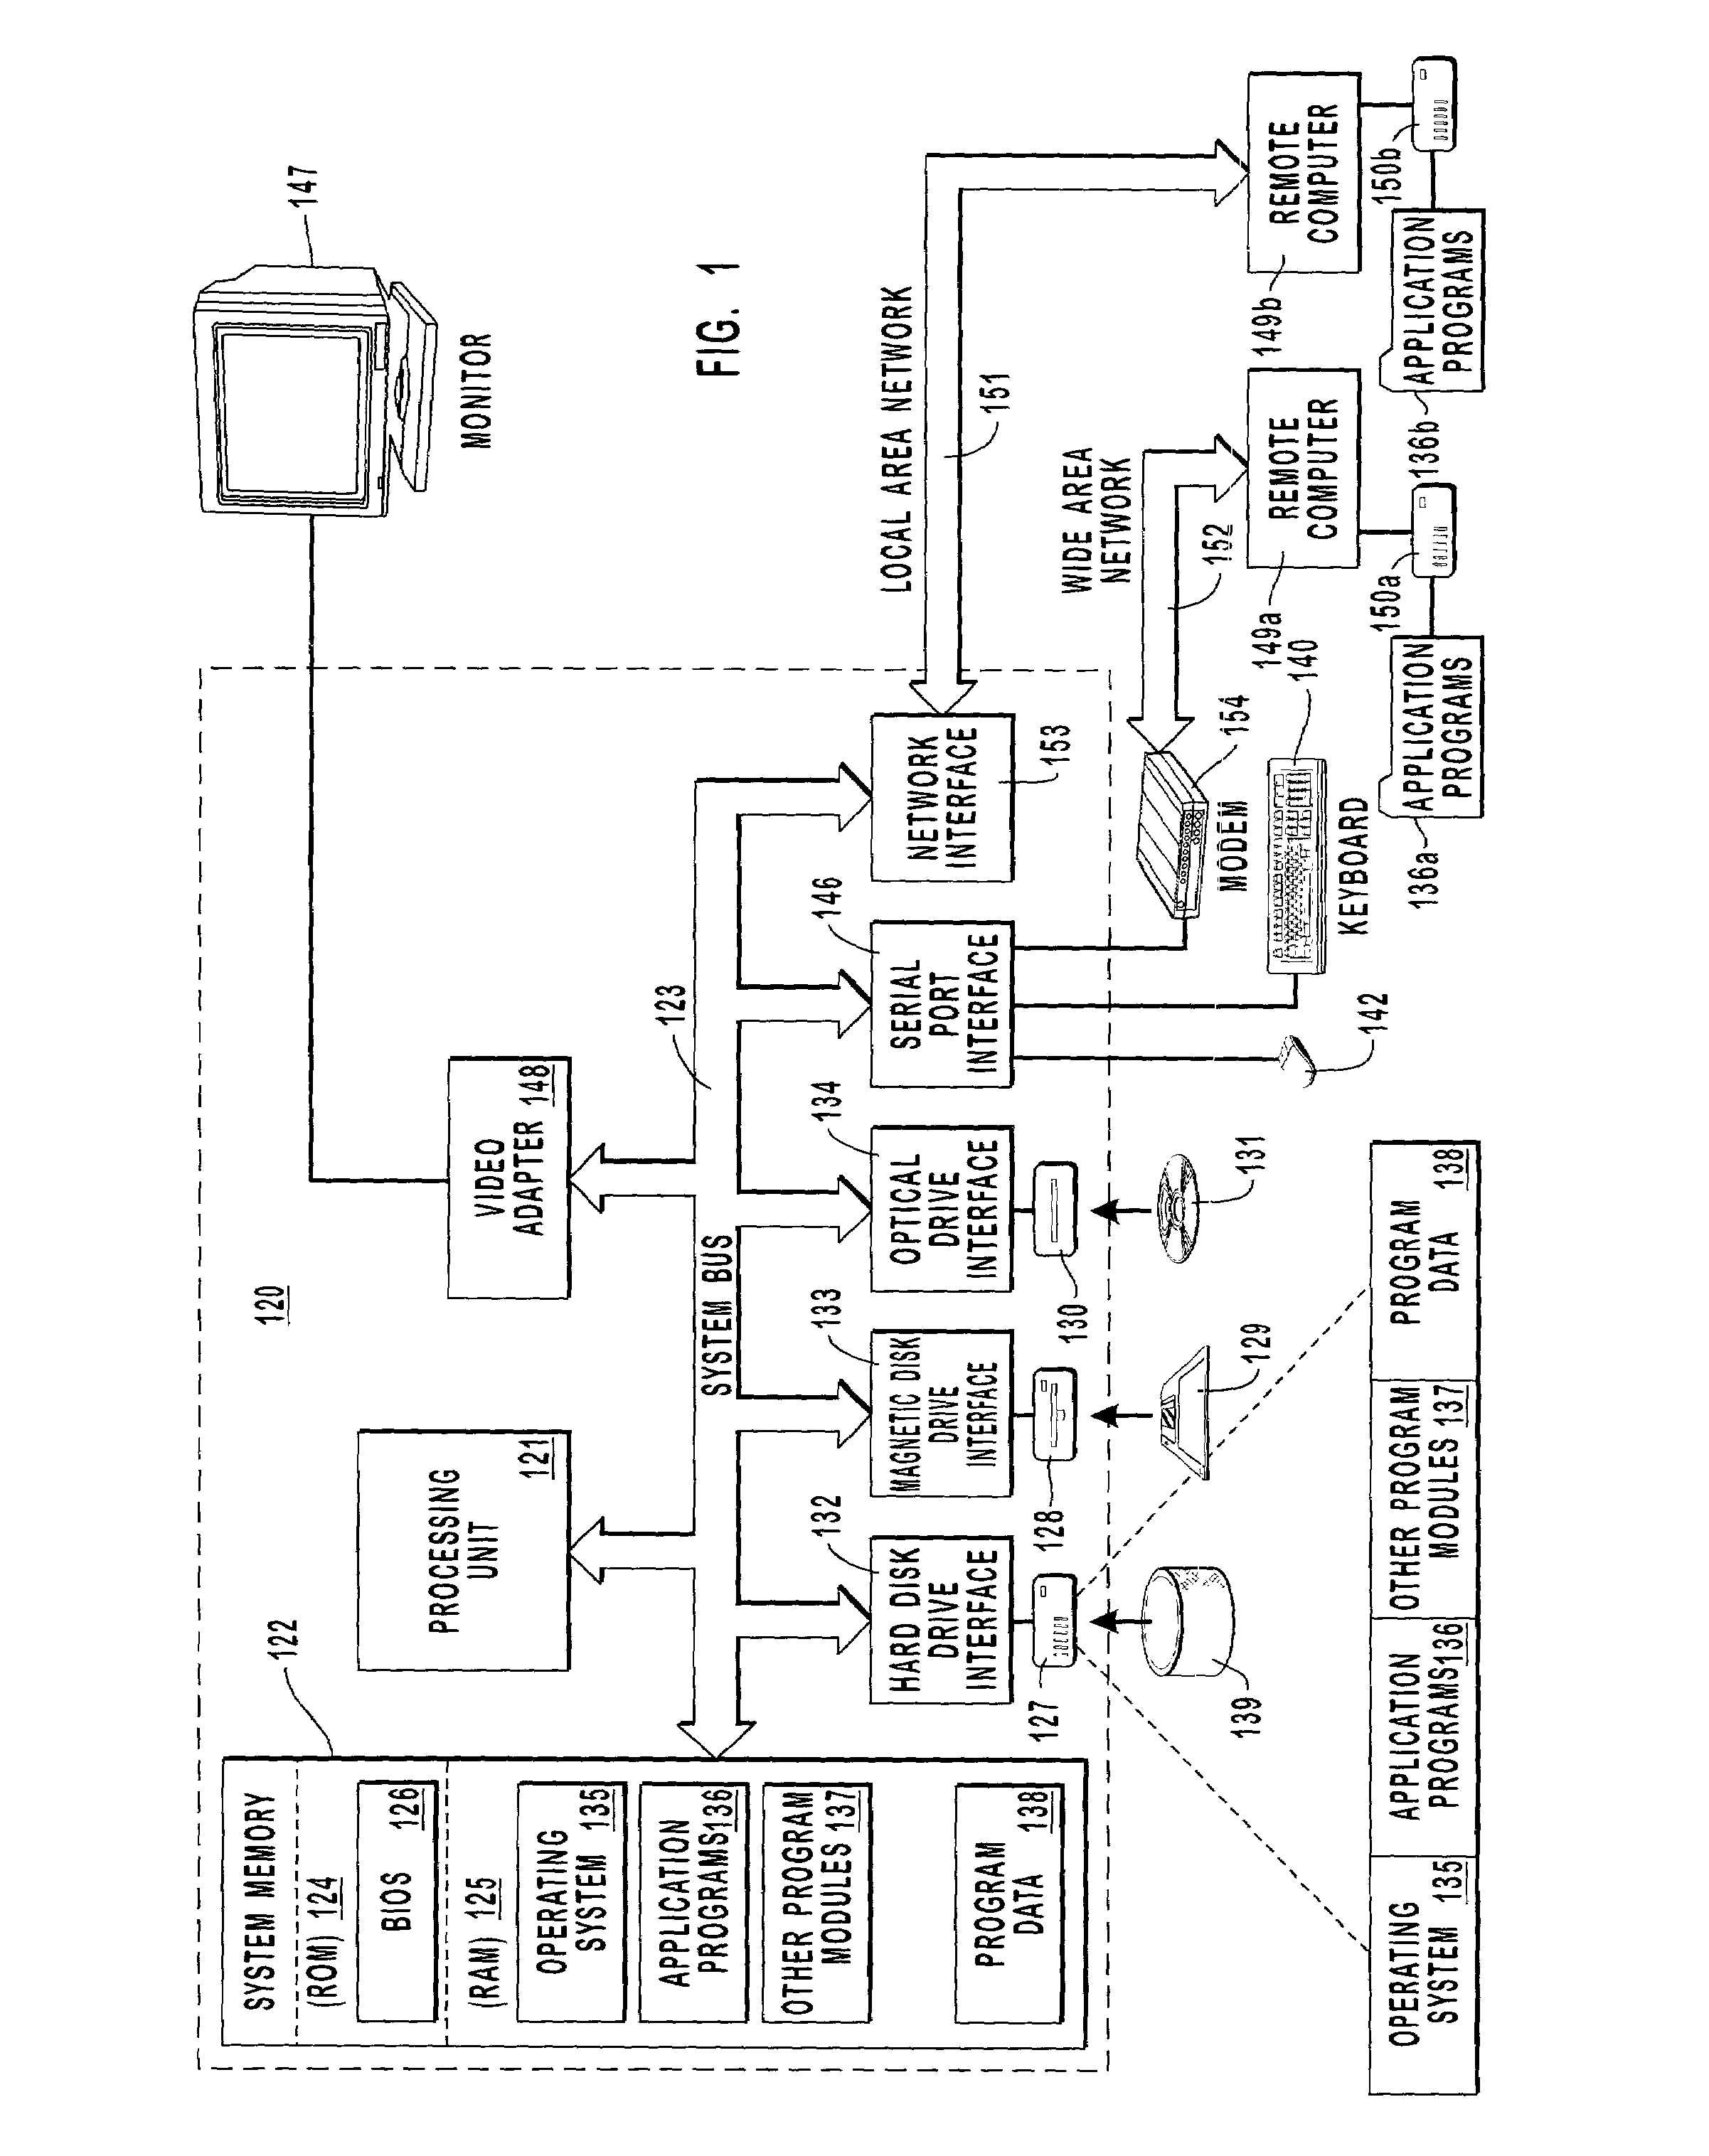 Using a mobile device to compose an electronic message that includes audio content